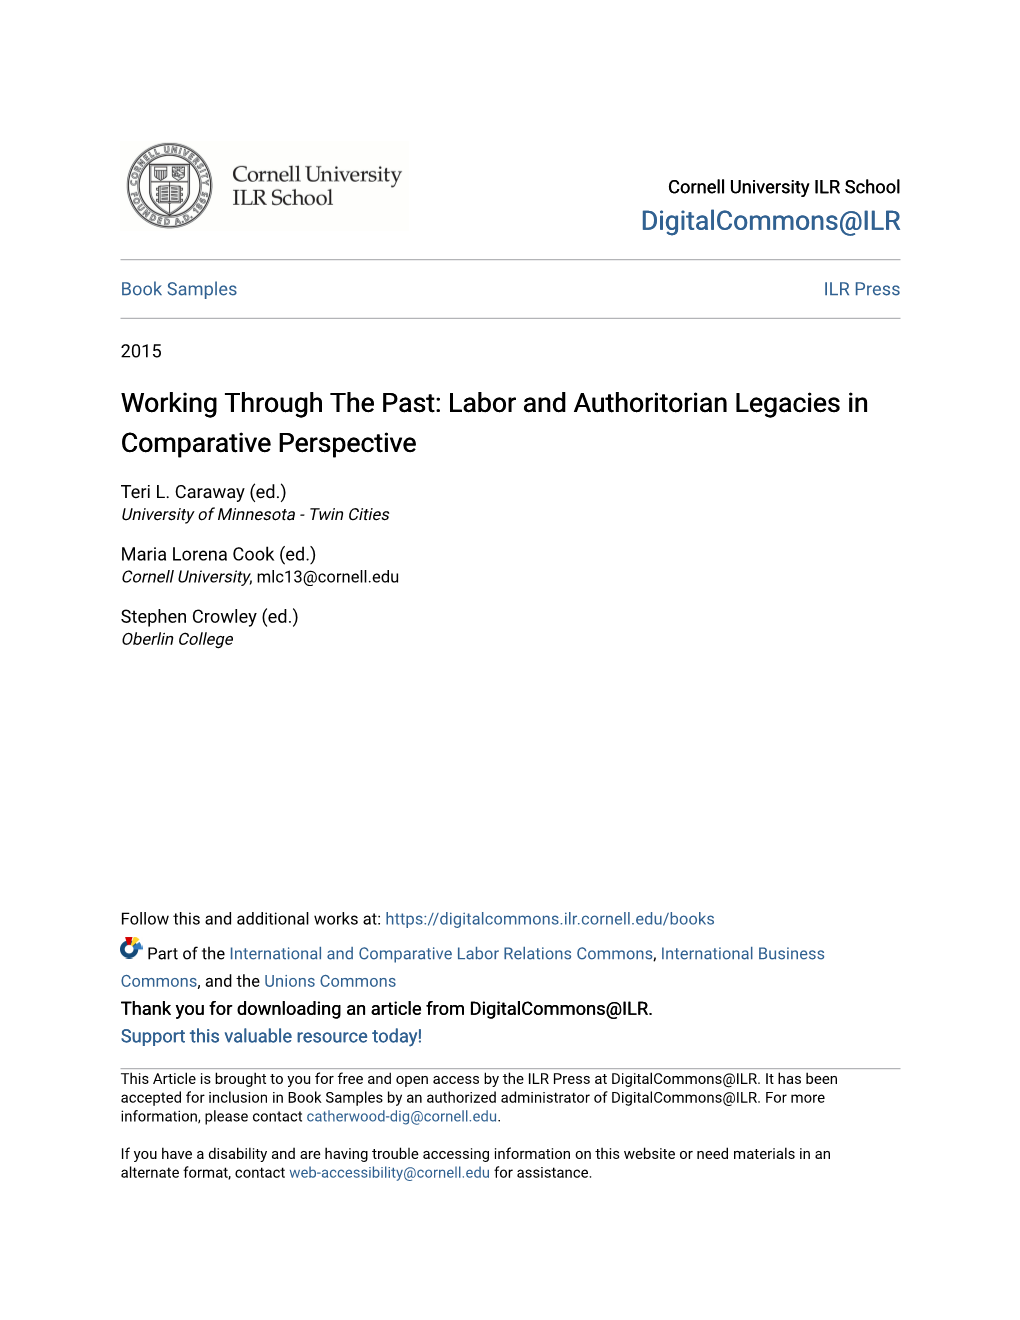 Labor and Authoritorian Legacies in Comparative Perspective